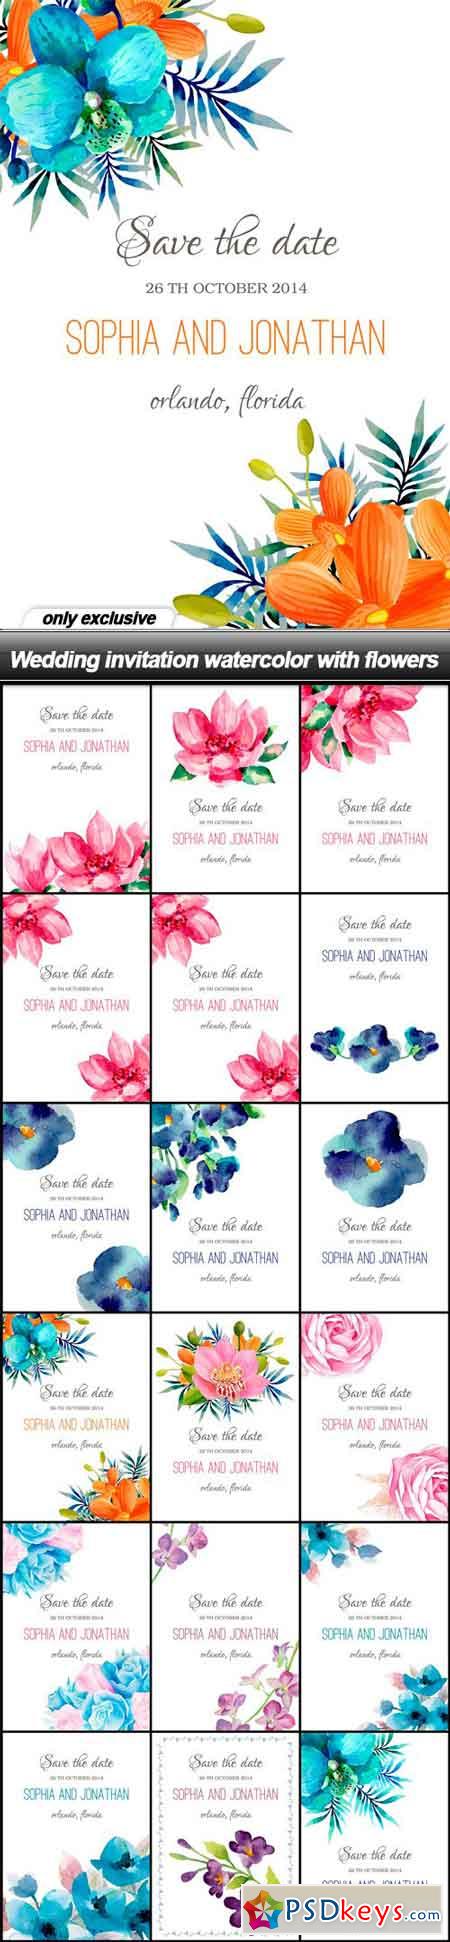 Wedding invitation watercolor with flowers - 18 EPS